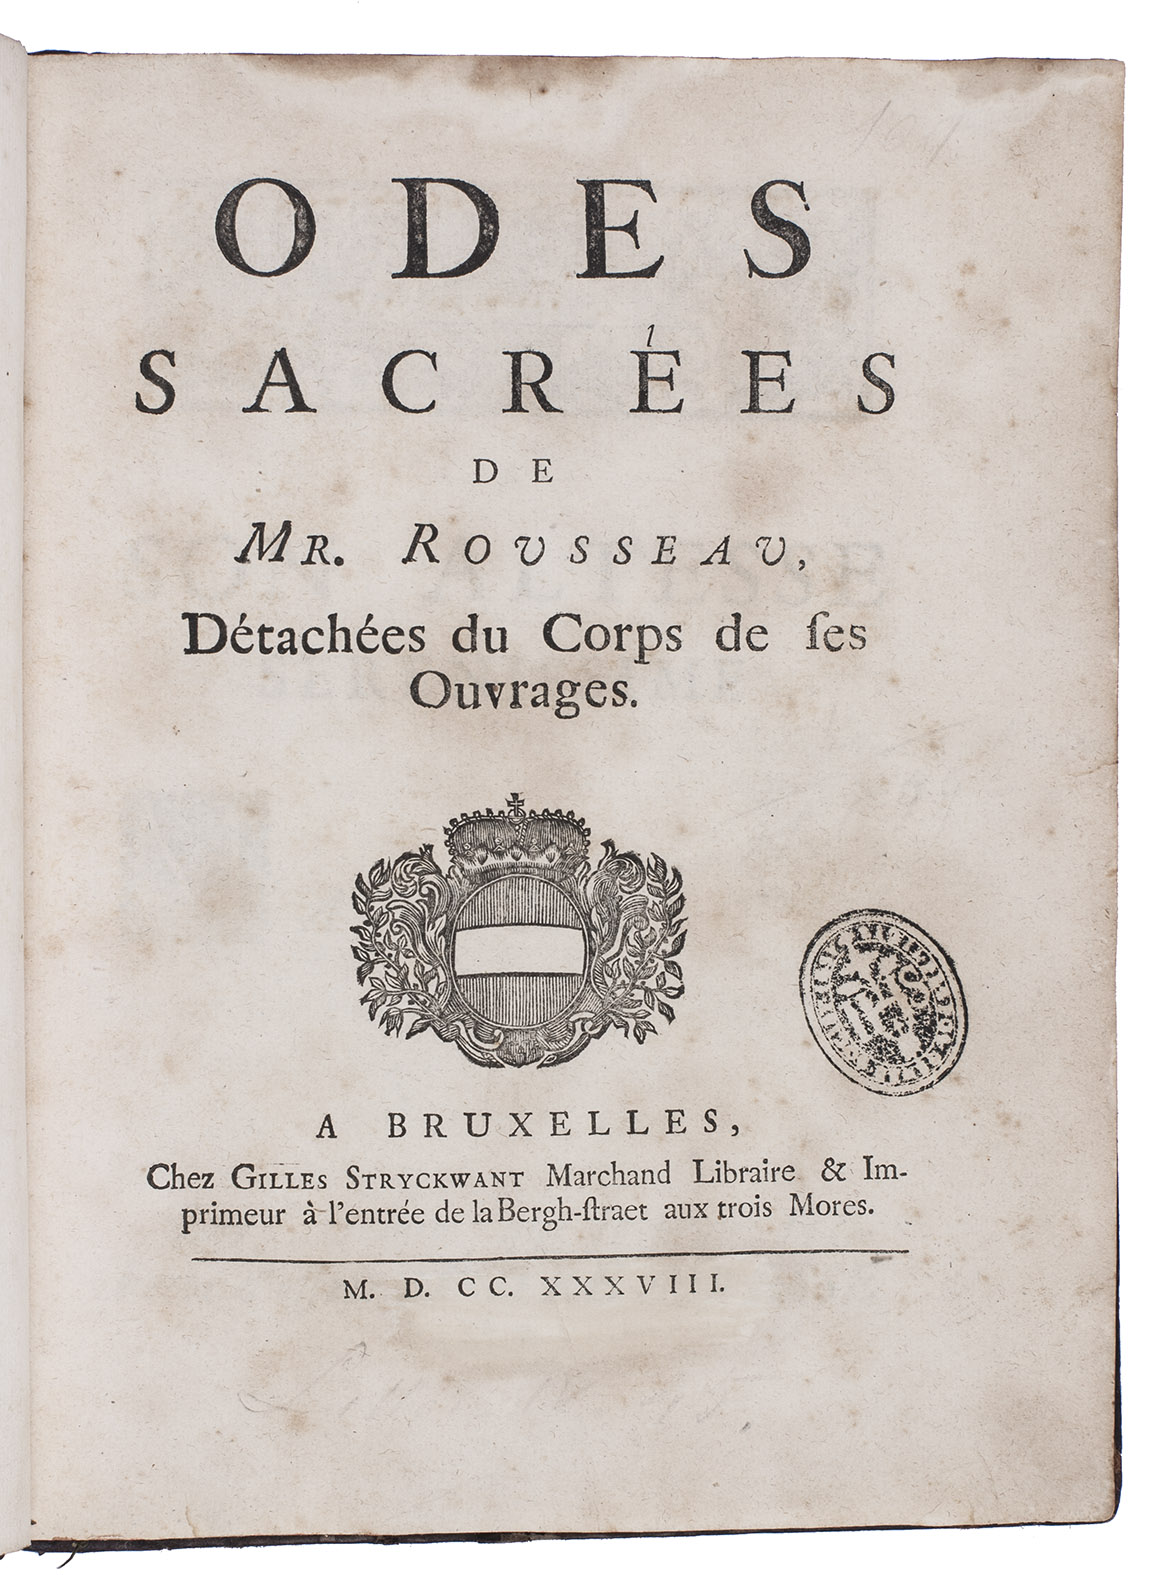 ROUSSEAU, Jean Baptiste. - Odes sacres ..., dtaches du corps de ses ouvrages.Brussels, Gilles Stryckwant, 1738. 4to. With a woodcut coat of arms of Austria on title-page. Contemporary mottled calf, richly gold-tooled spine and board edges.